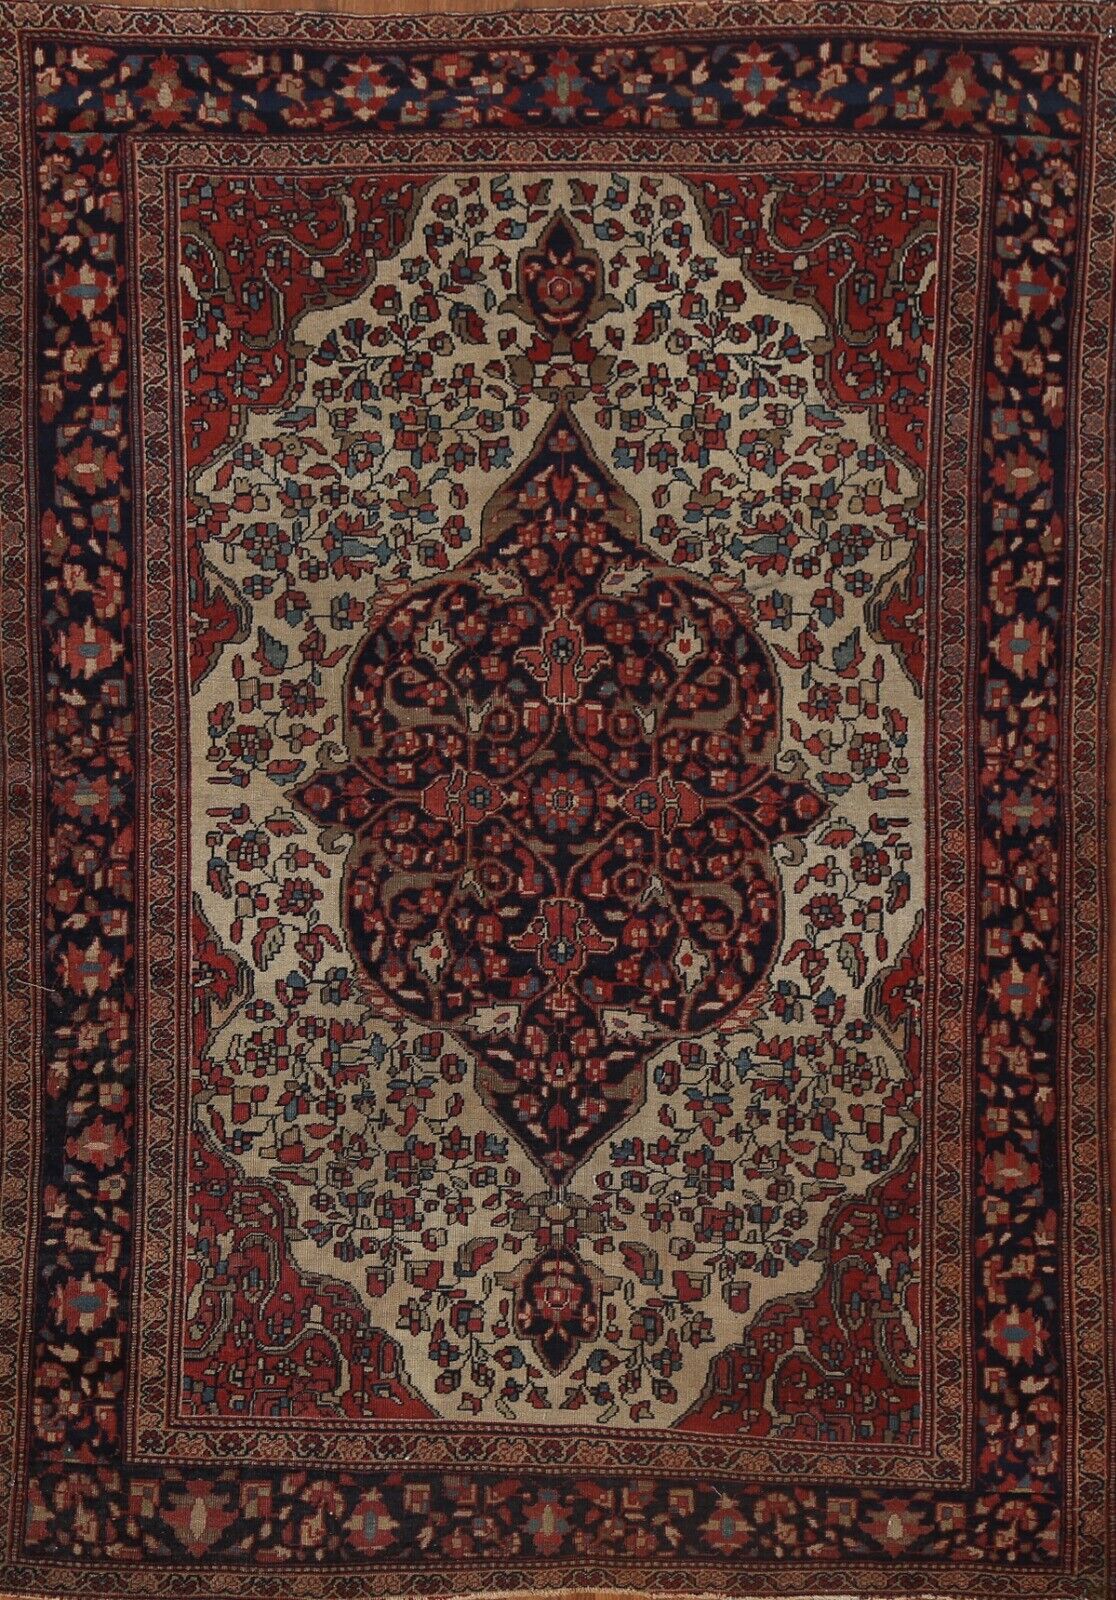 Pre-1900 Antique Vegetable Dye Sarouk Farahan 4\'x5\' Area Rug Hand-knotted Wool